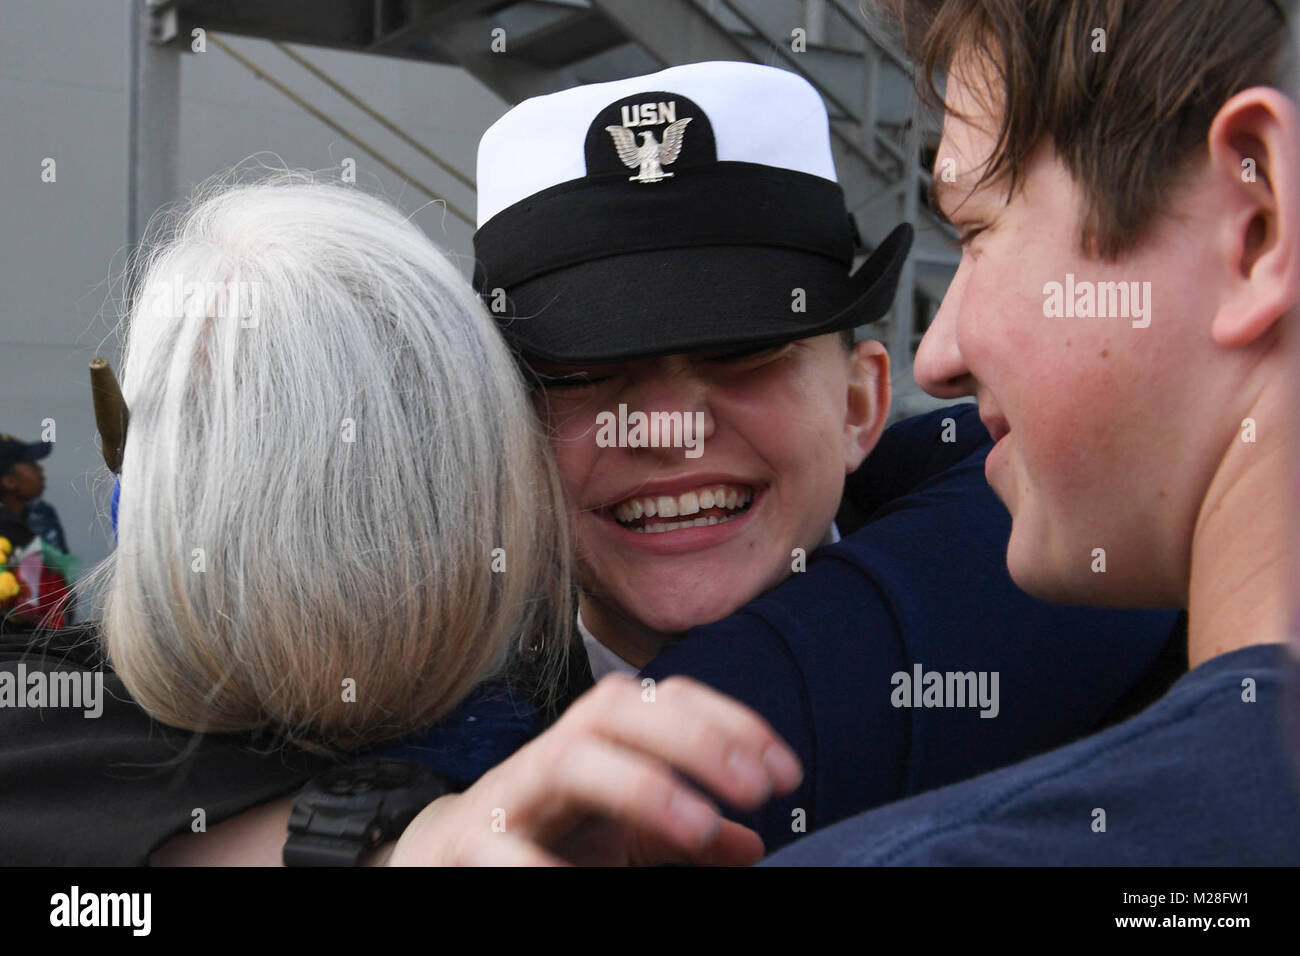 SAN DIEGO (Feb. 2, 2018) -- Hospital Corpsman Seaman Katherine Salisbury greets her family on the pier at Naval Base San Diego as the amphibious assault ship USS America (LHA 6) returns from its maiden deployment. America, part of the America Amphibious Ready Group, with embarked 15th Marine Expeditionary Unit, is returning from a regularly scheduled deployment to the Western Pacific and Middle East. The U.S. Navy has patrolled the Indo-Pacific region routinely for more than 70 years promoting peace and security. (U.S. Navy Stock Photo